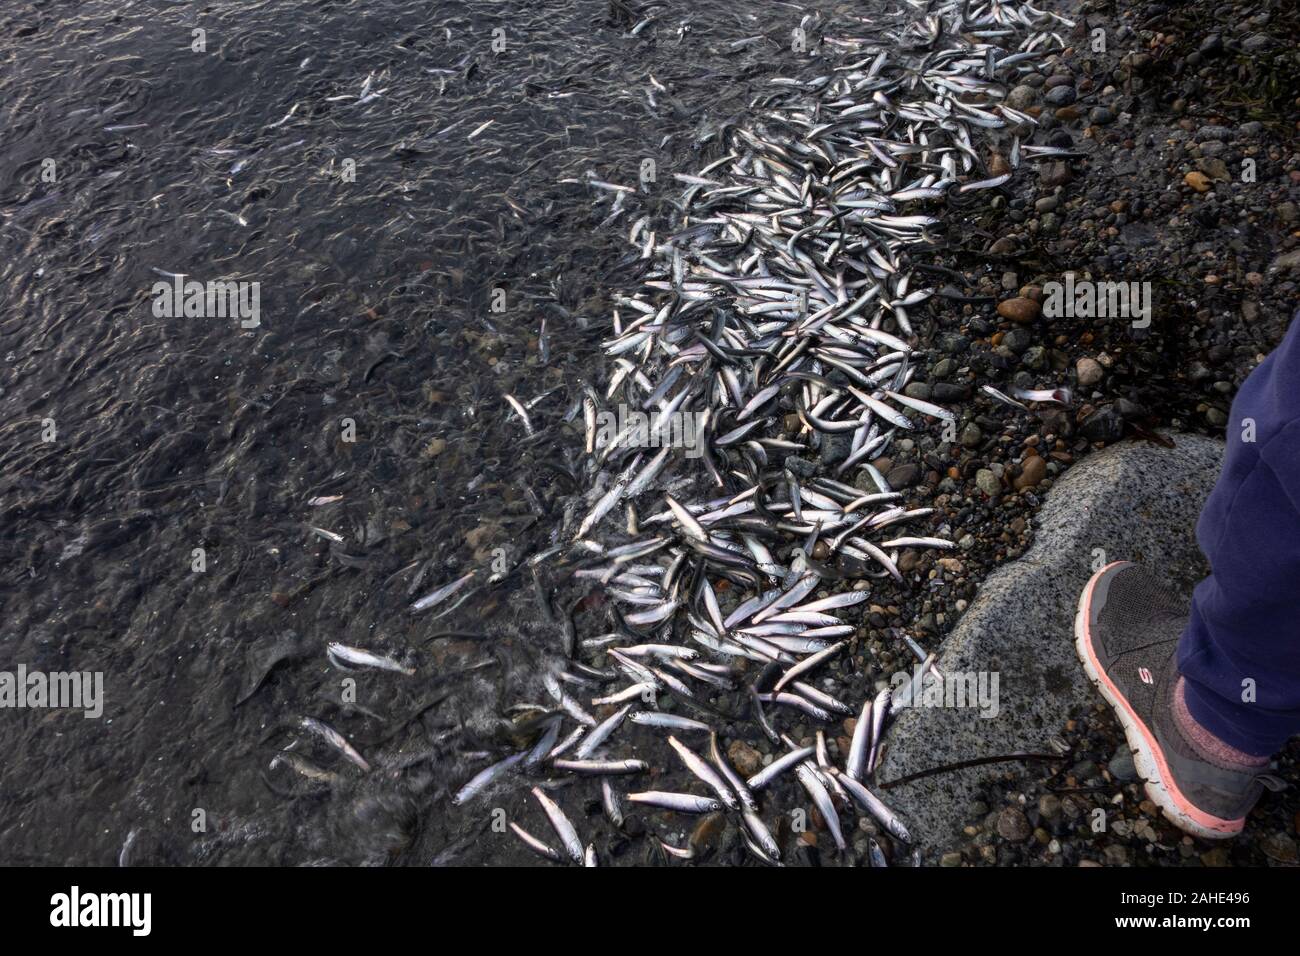 Thousands of tiny fish,  anchovies,  washed up to shore at White Rock Beach, south of Vancouver,  BC Canada on Dec. 25, 2019.   Drawing crowds of bird Stock Photo